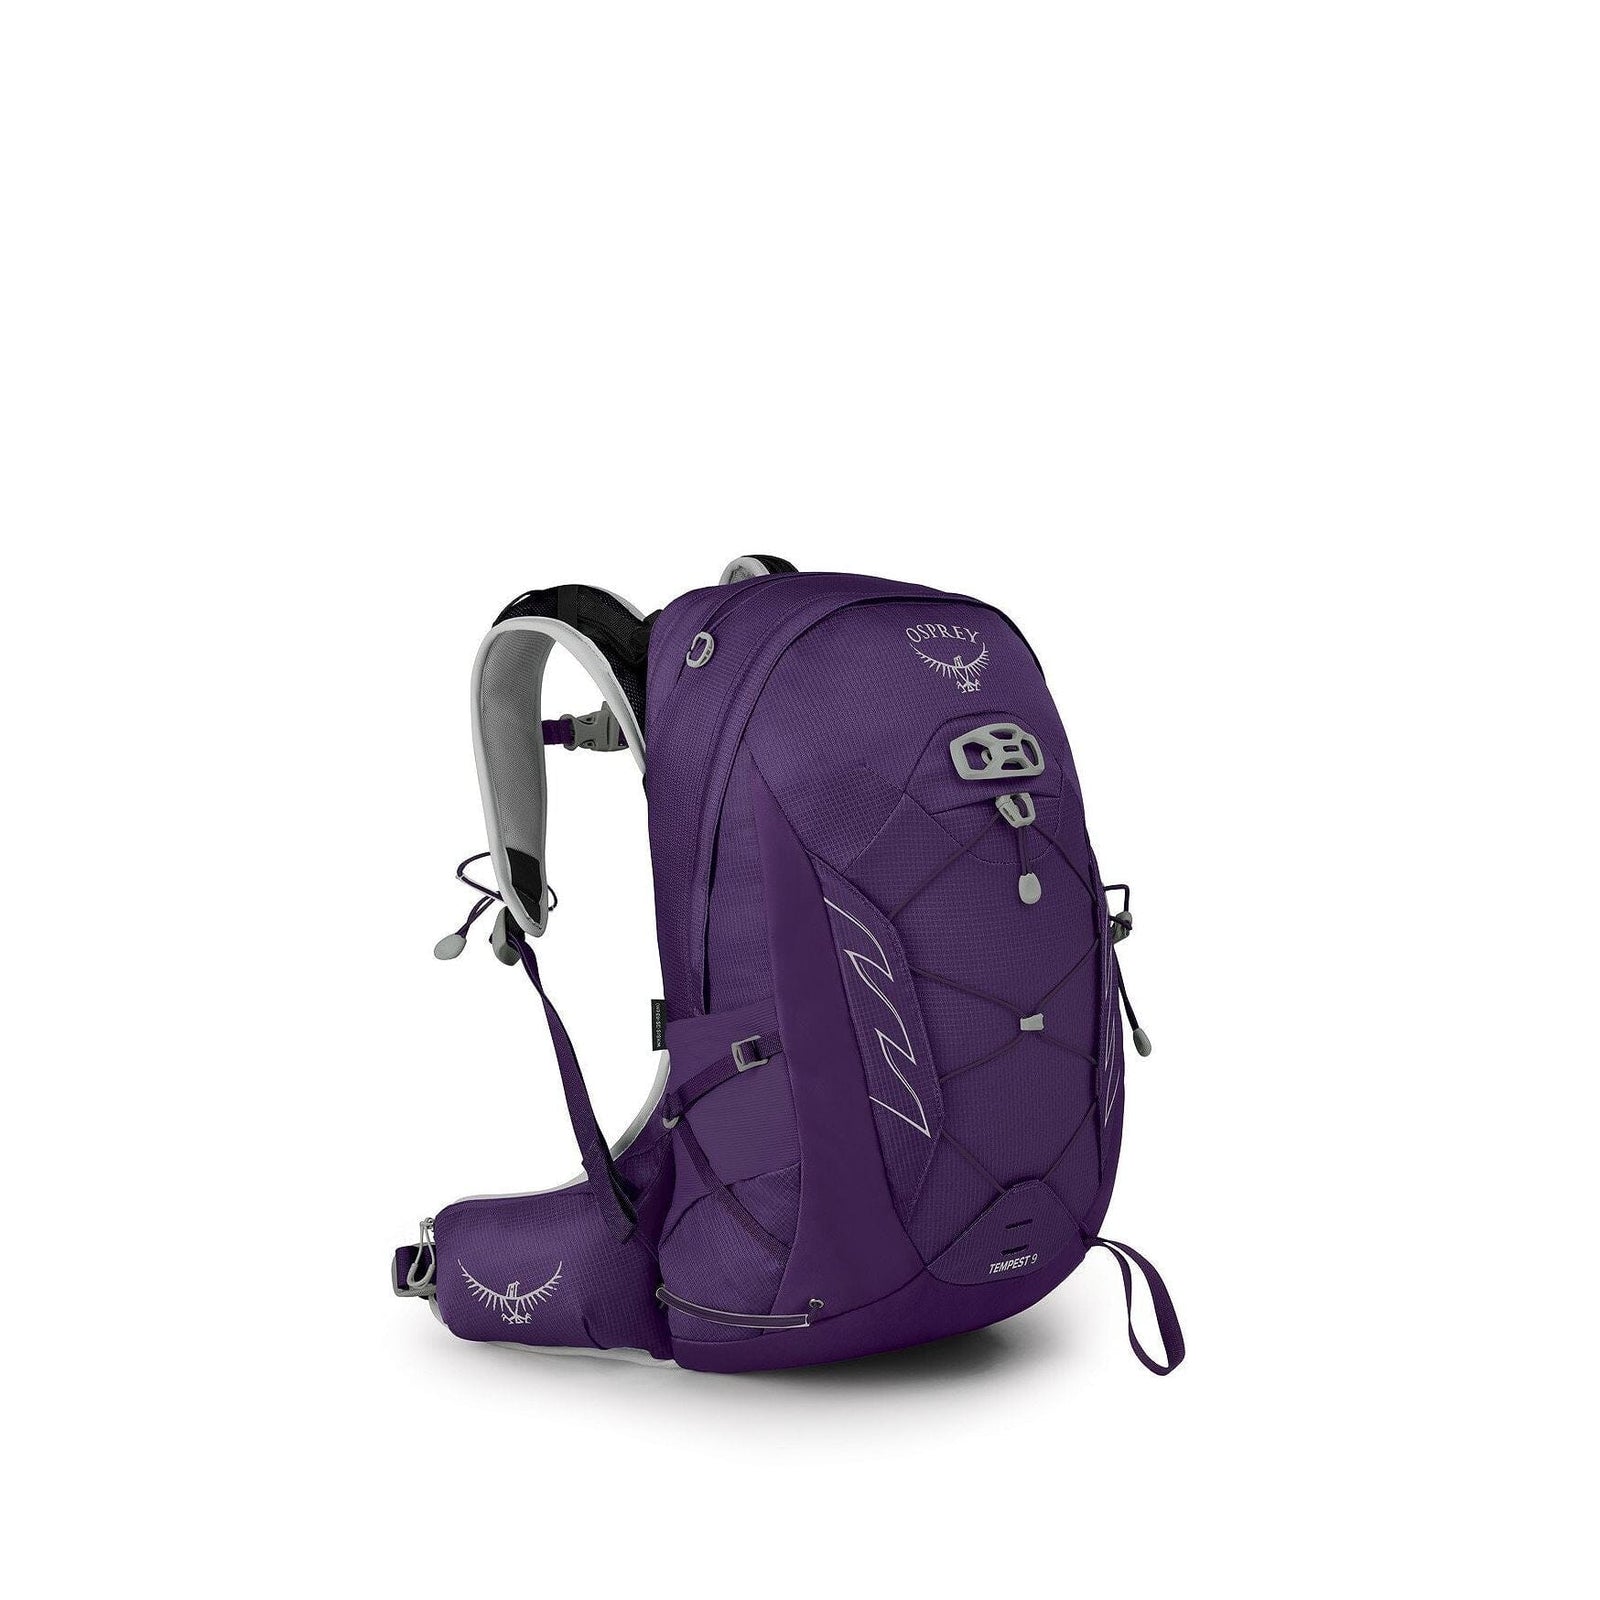 Osprey Tempest 9 Women's Day Hiking Backpack Violac Purple M/L 